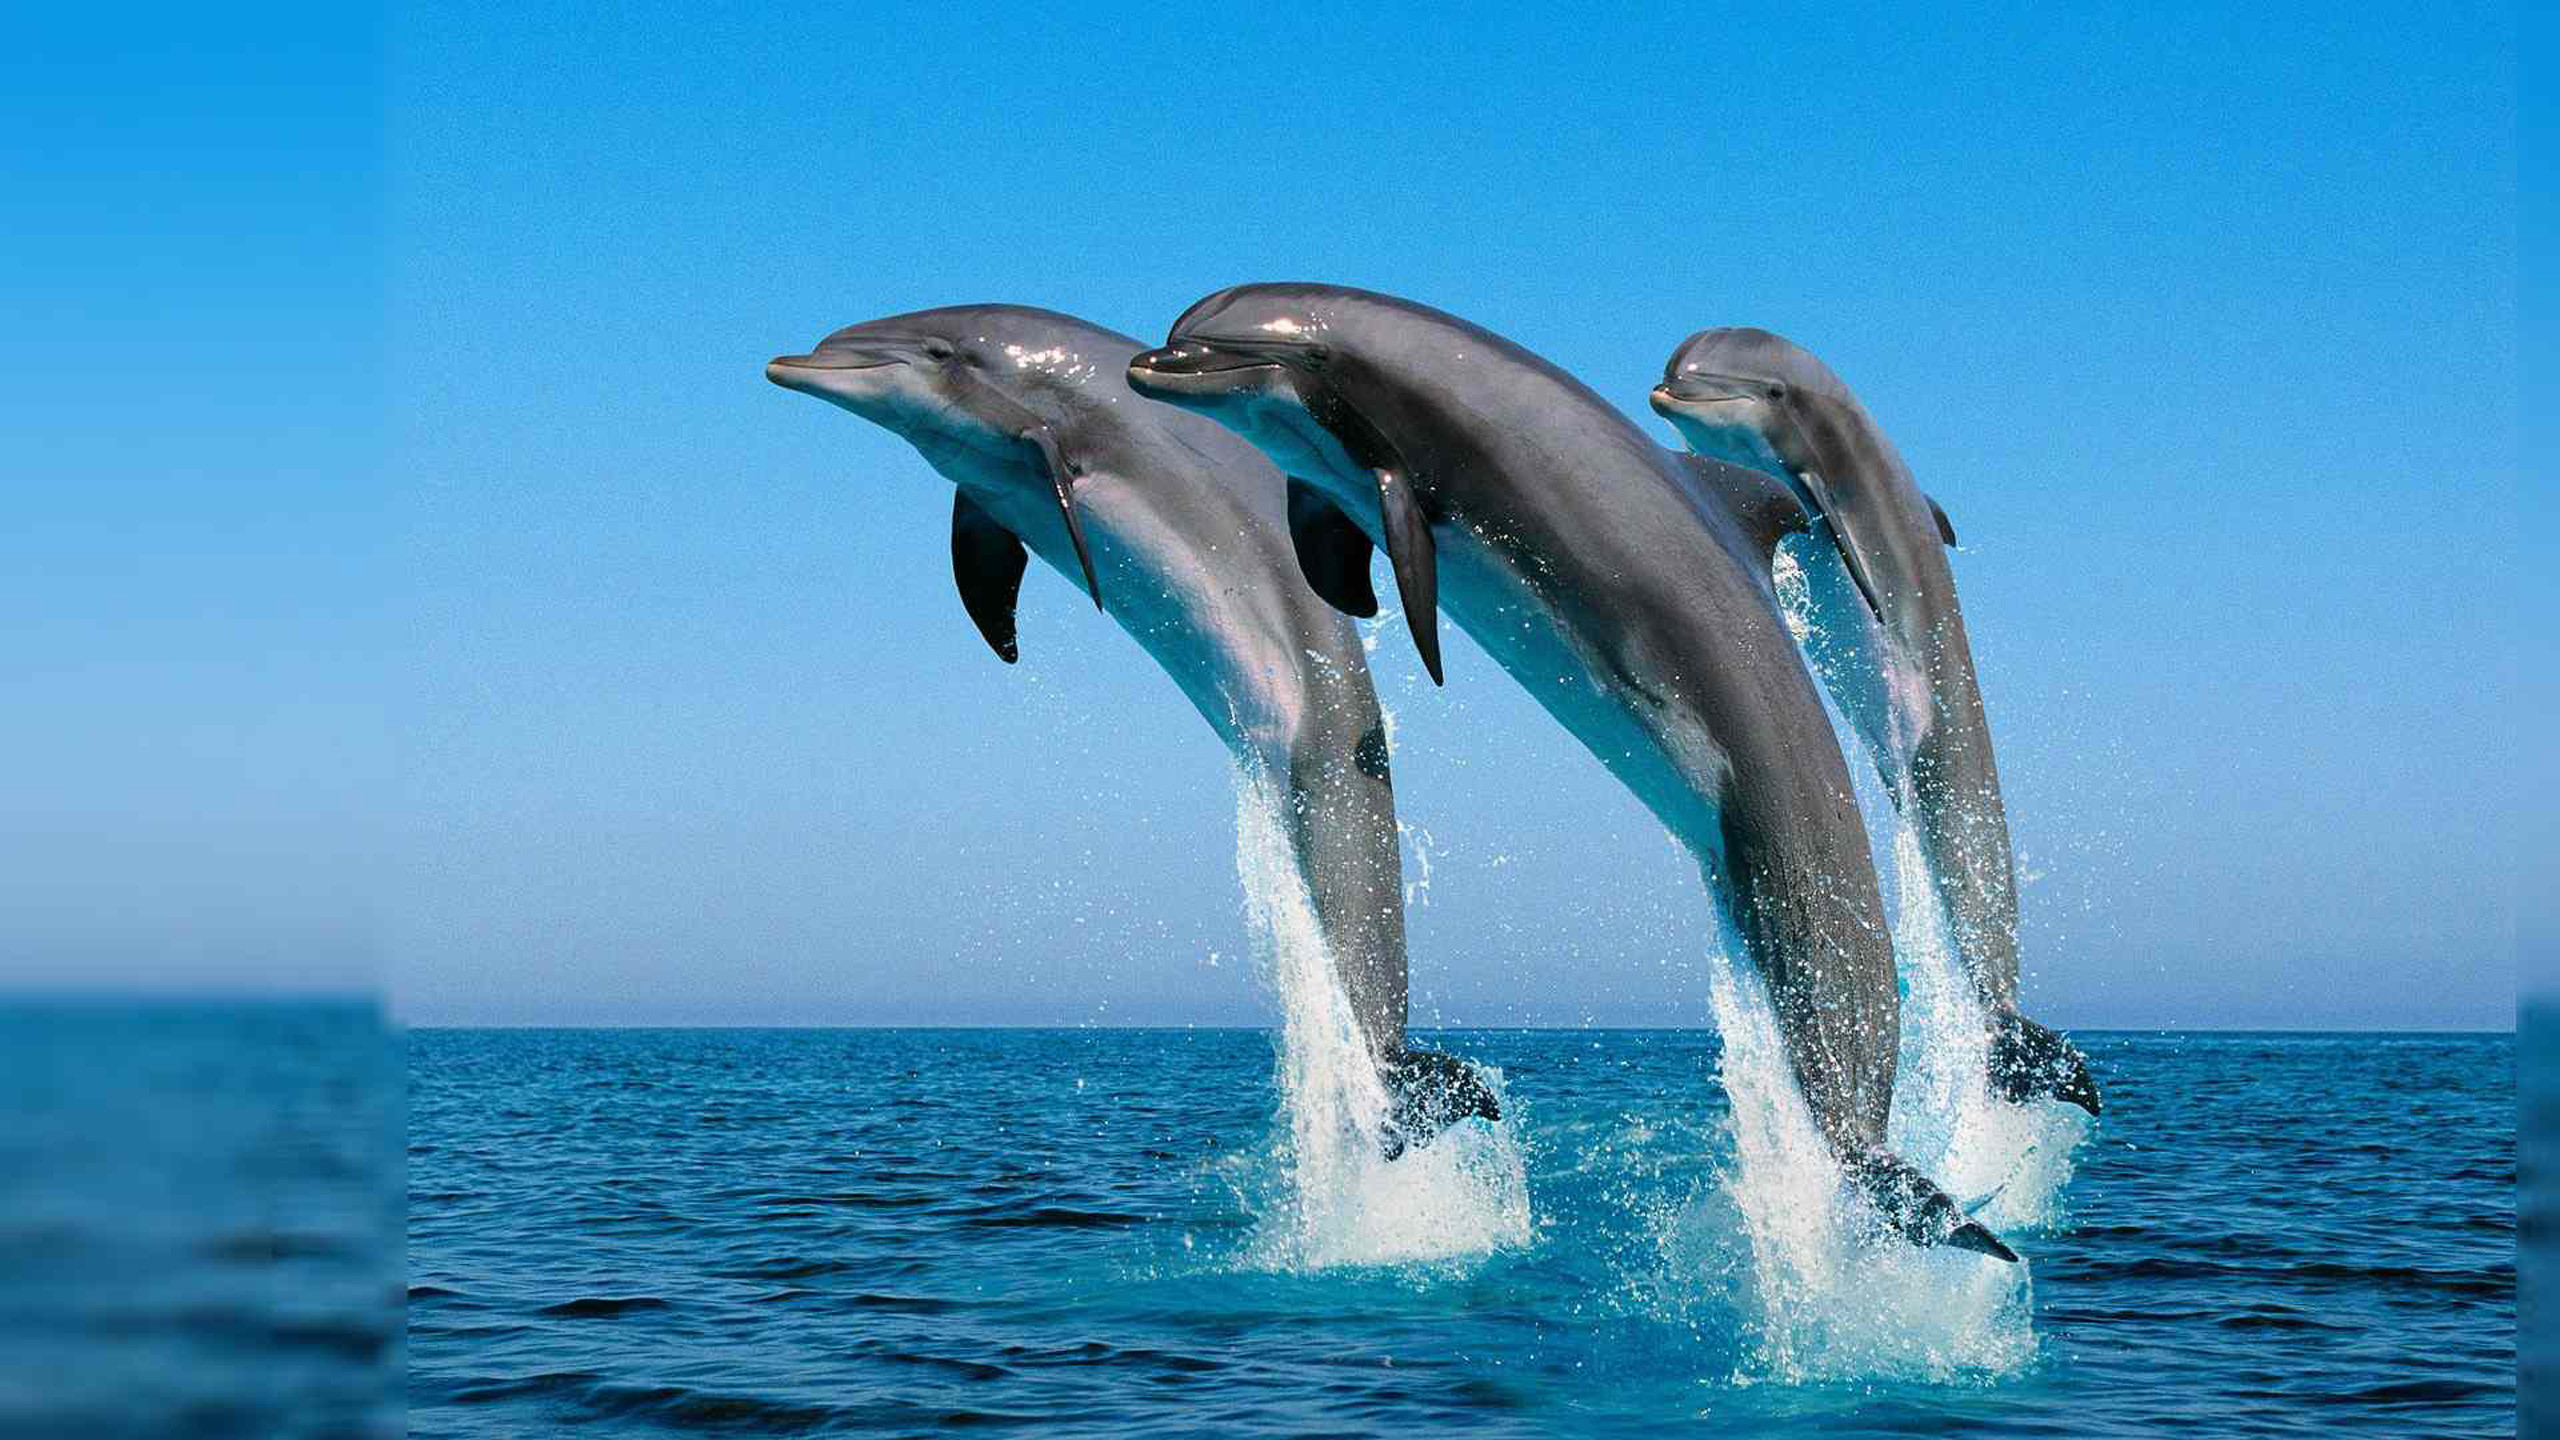 Dolphins Jump In The Air To The Caribbean Sea Summer Hd Wallpapers For Desktop Wallpapers13.com